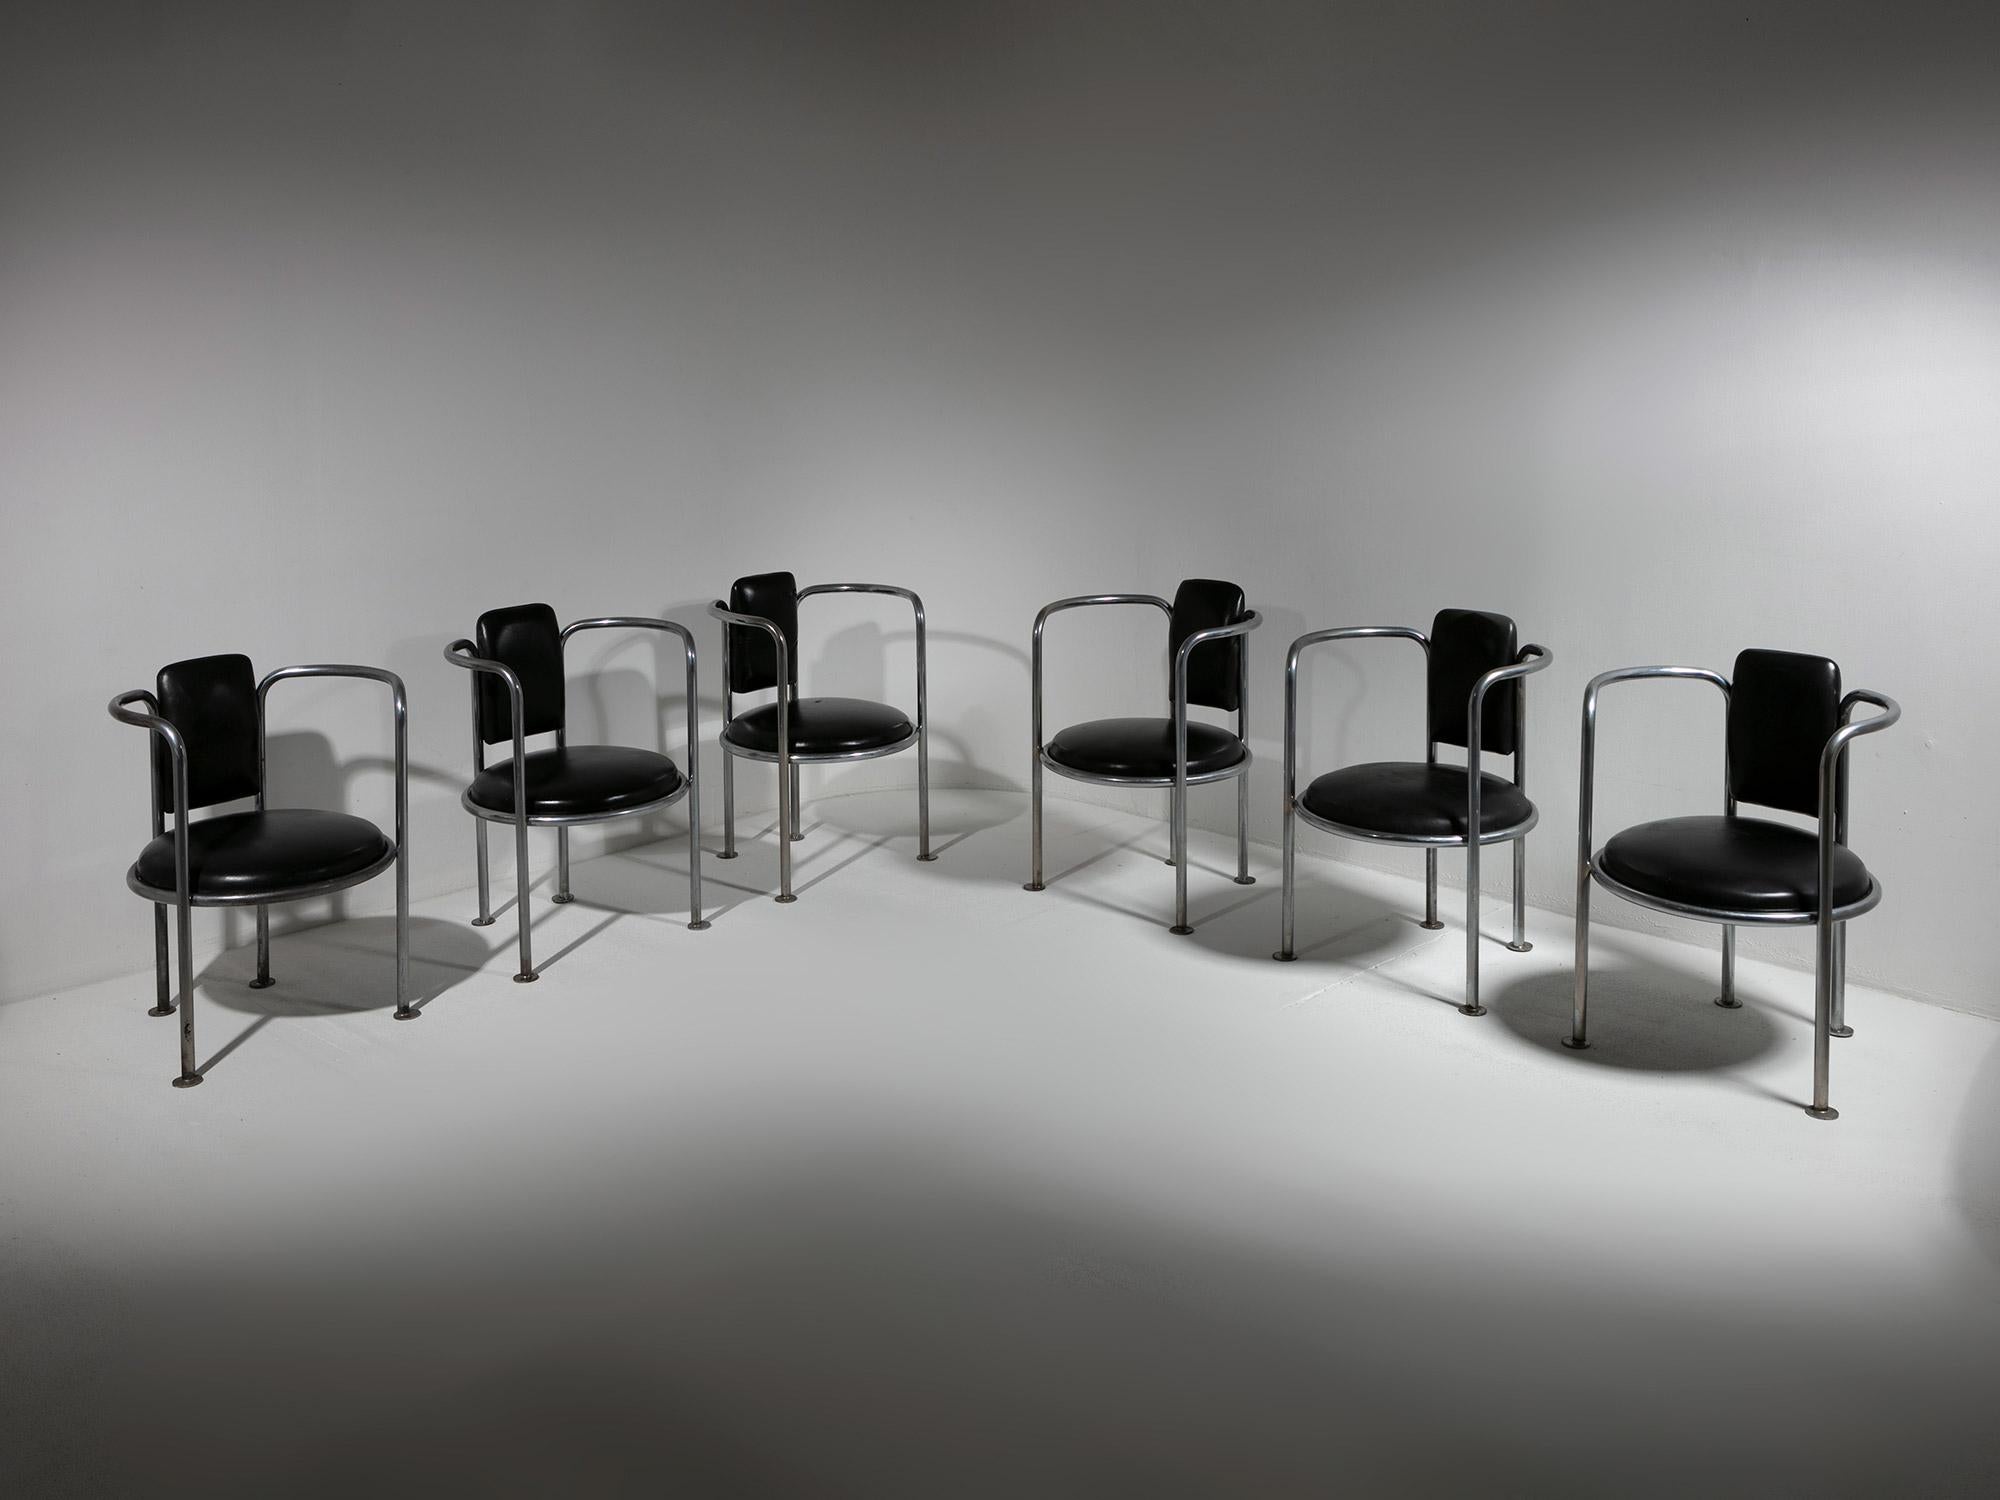 10 Chrome Black Leather Armchairs in the style of Gae Aulenti Poltronova, 1960s For Sale 2